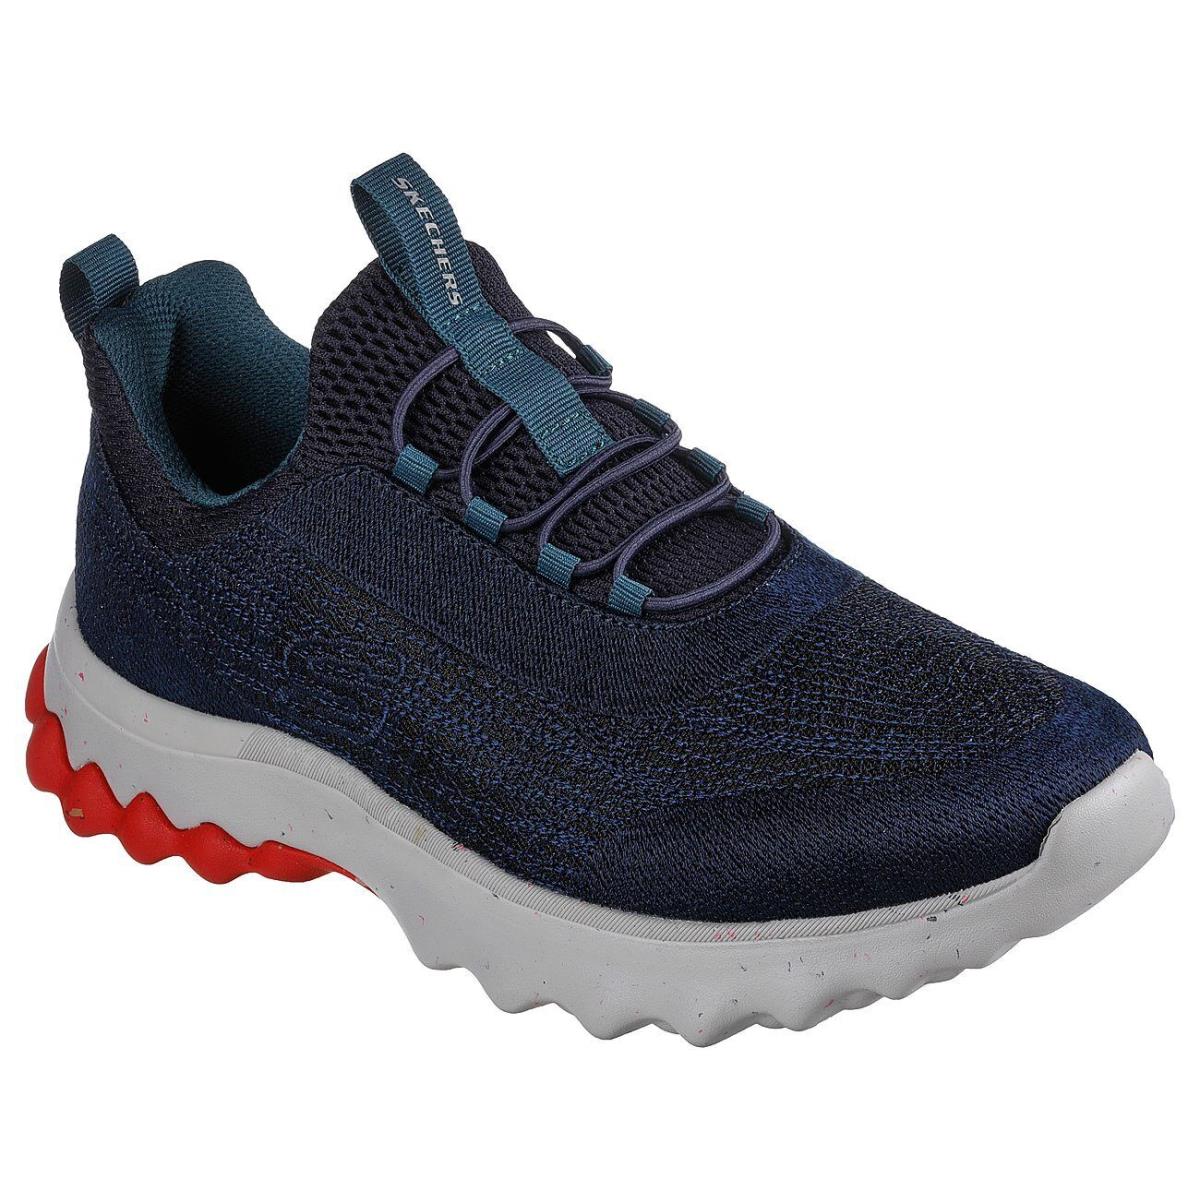 Men Skechers RX Fit Voston Reever Casual Shoes 210435 /dknv Multi Sizes Dk Navy